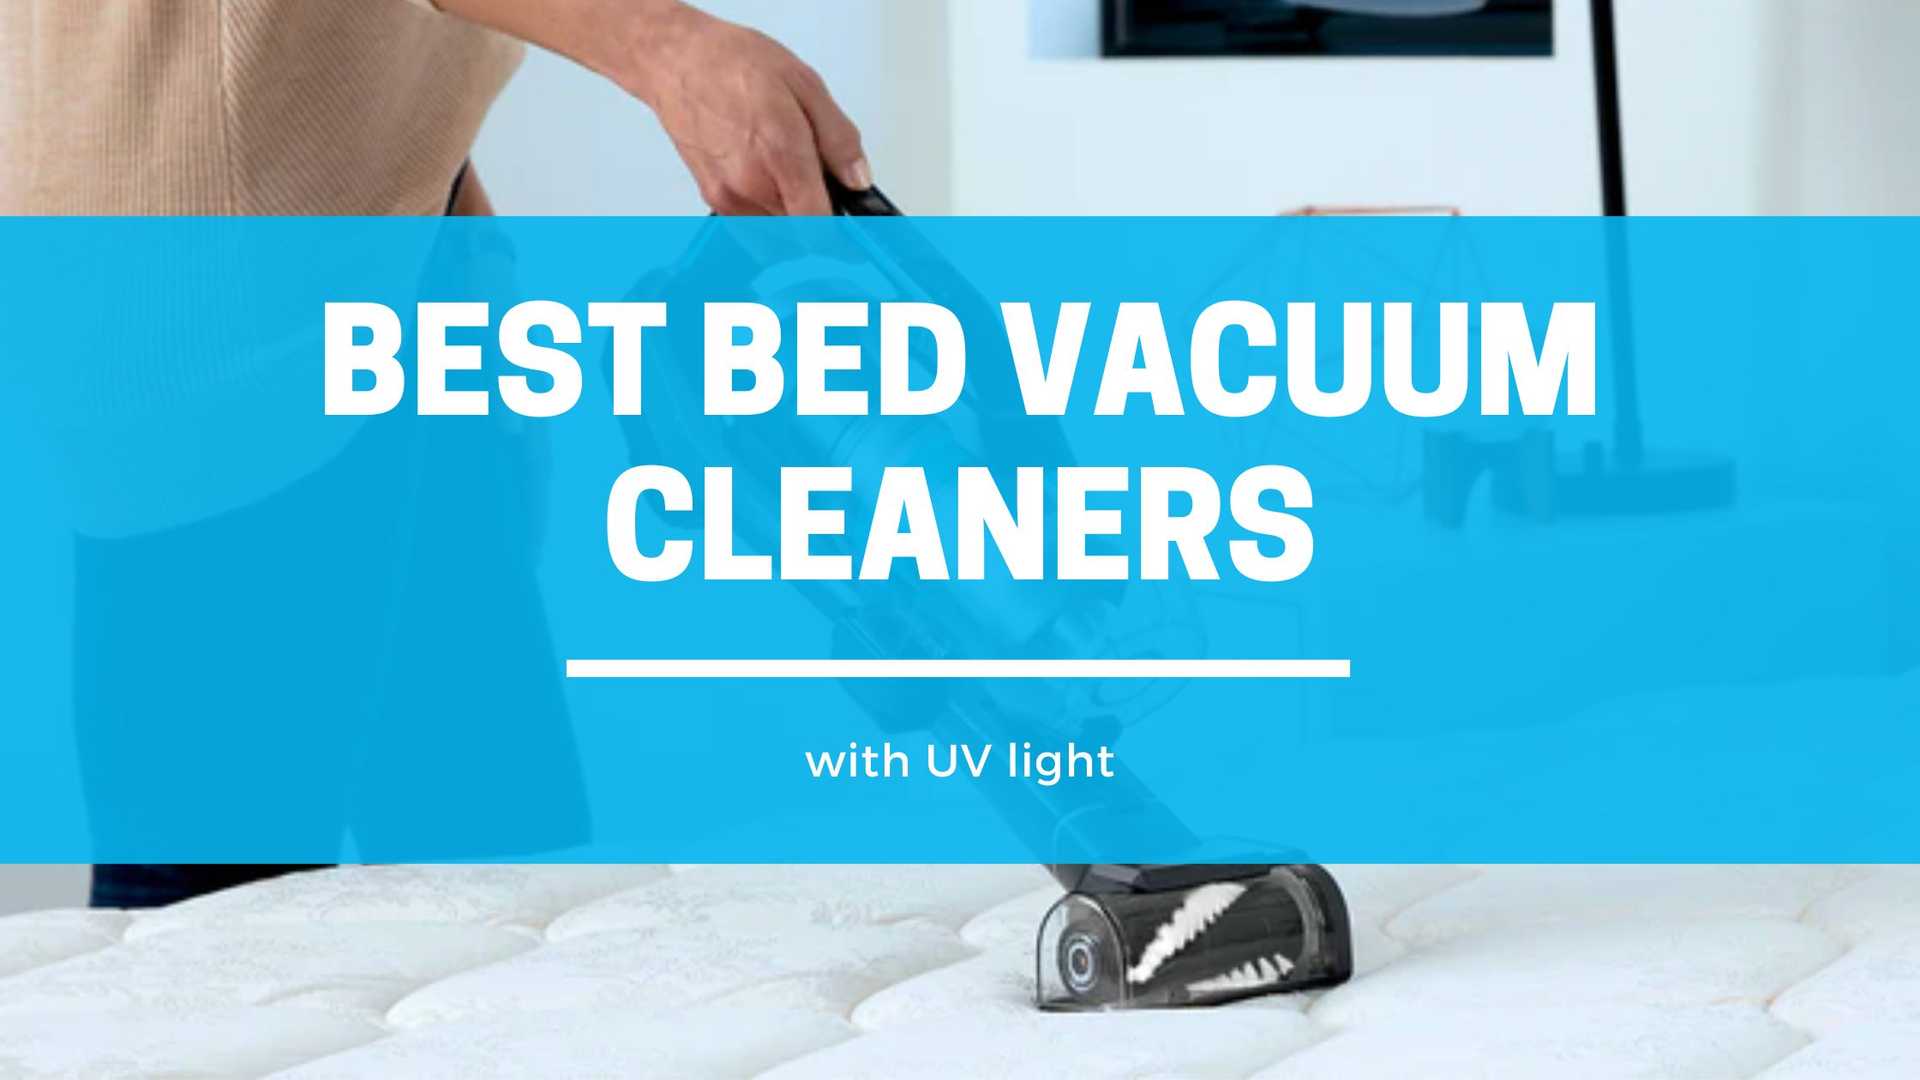 Best bed vacuum cleaners with UV light 2022